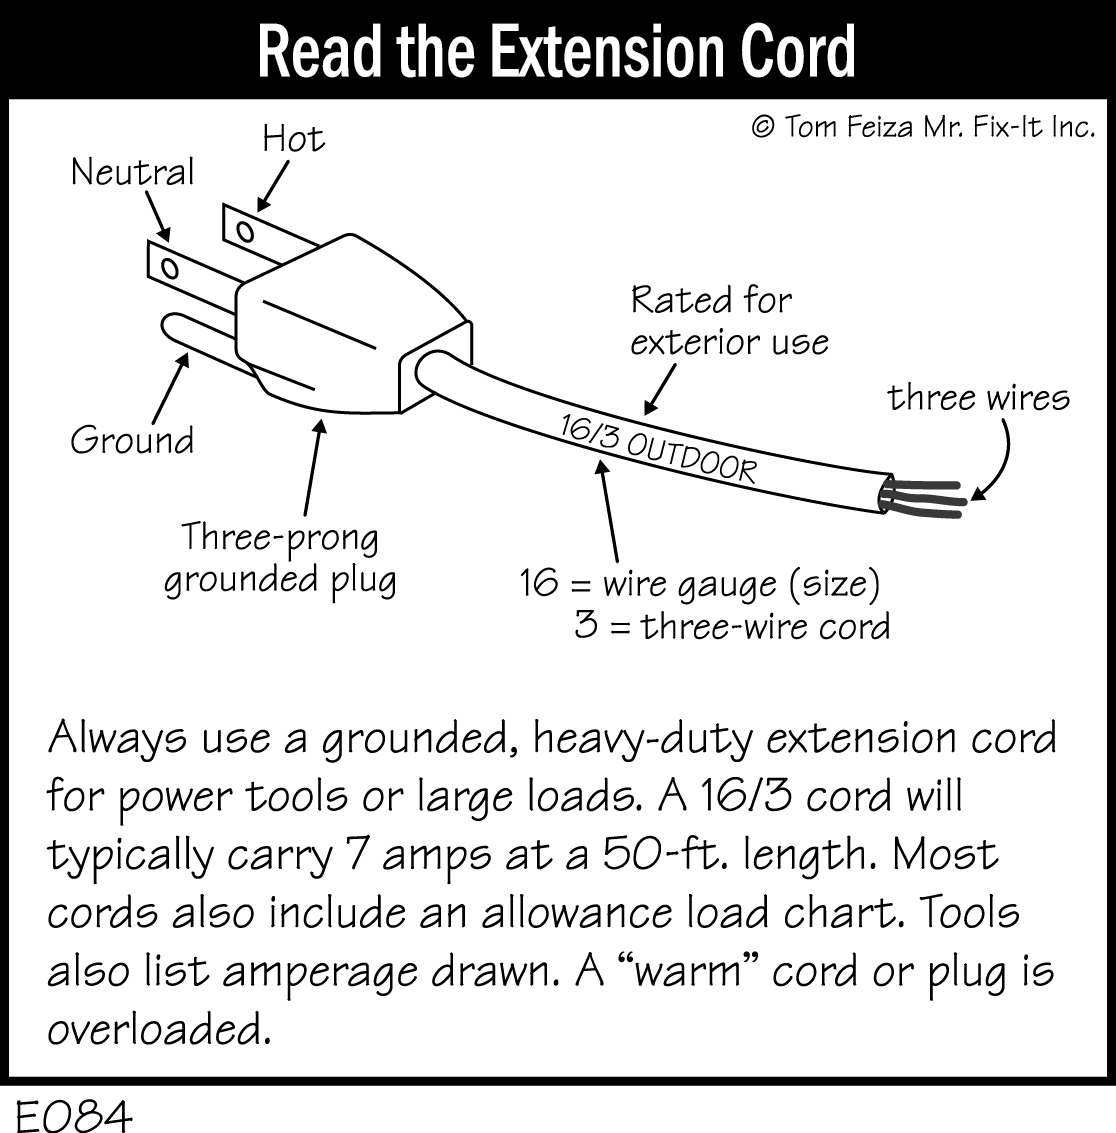 E084 - Read the Extension Cord - Covered Bridge Professional Home  Inspections Solenoid Valve Wiring Diagram Covered Bridge Home Inspections